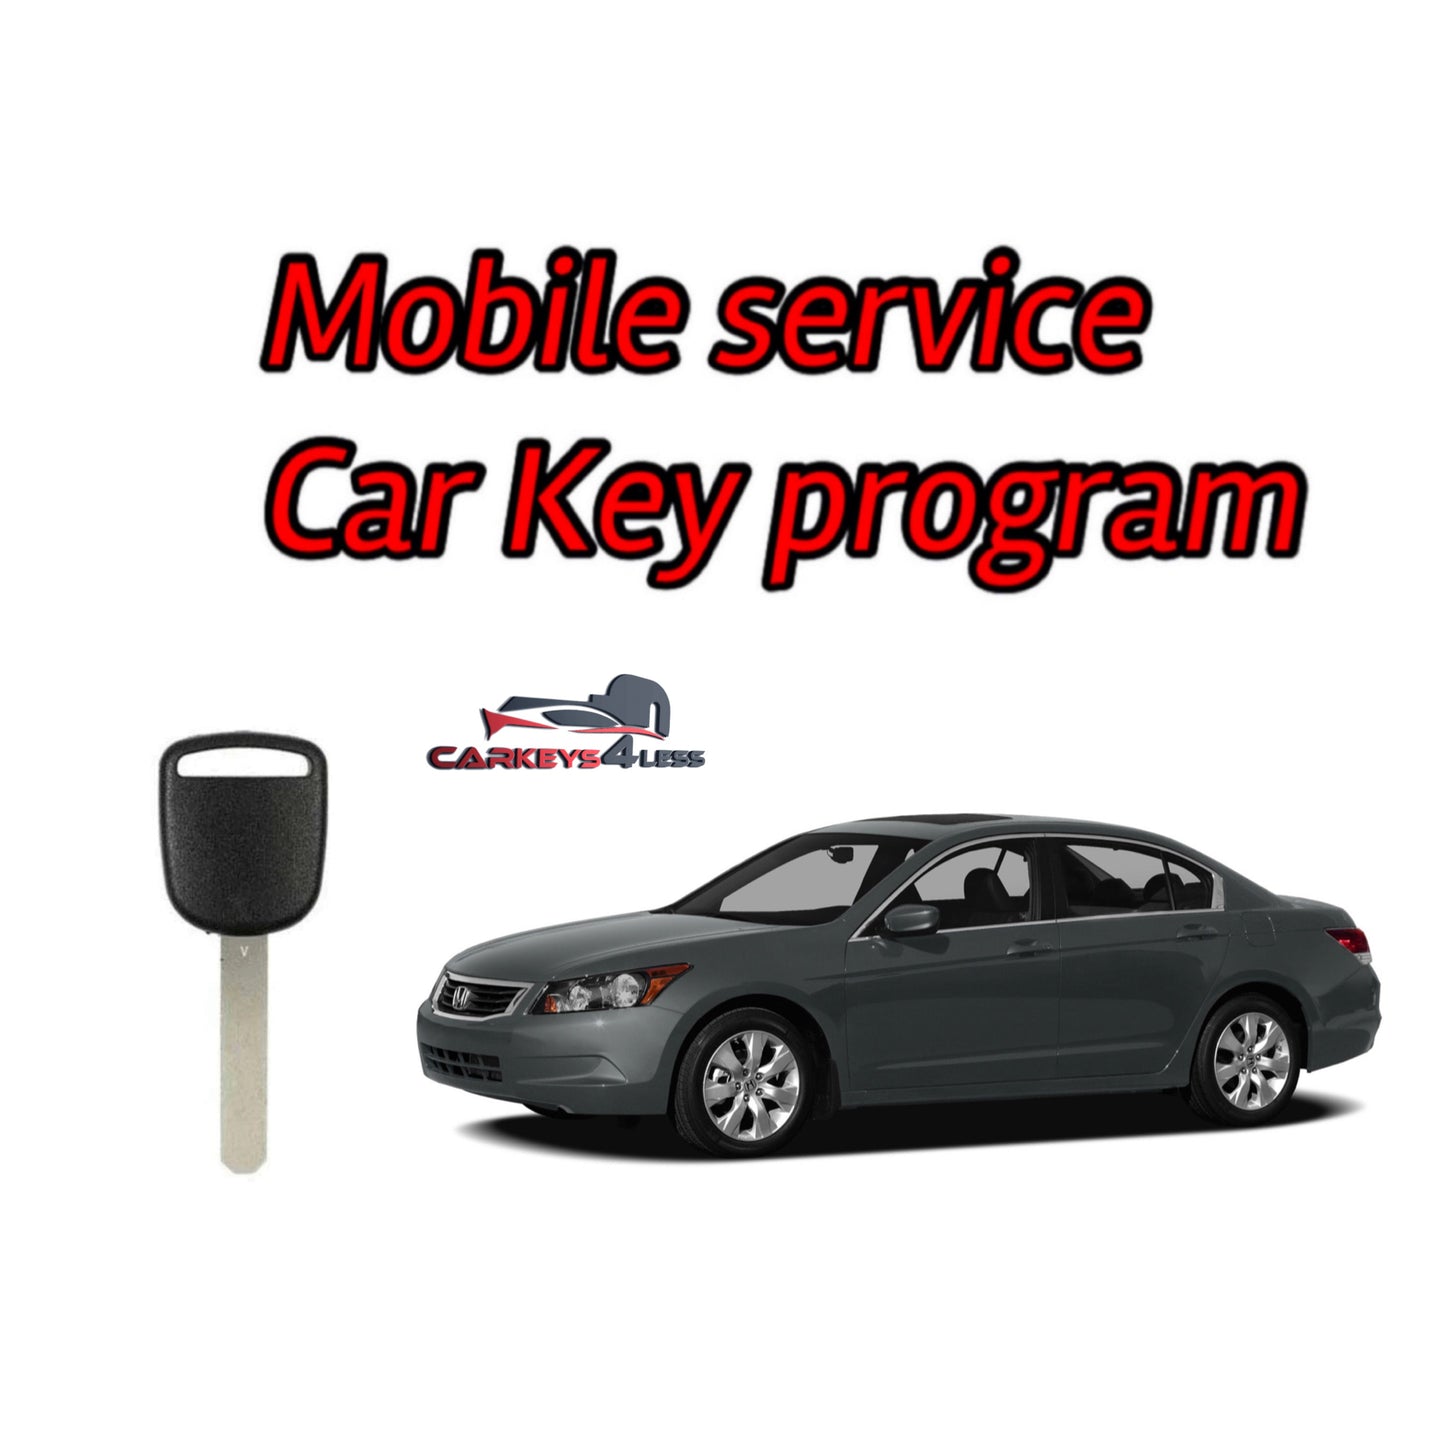 Mobile service for honda all keys lost or spare programming